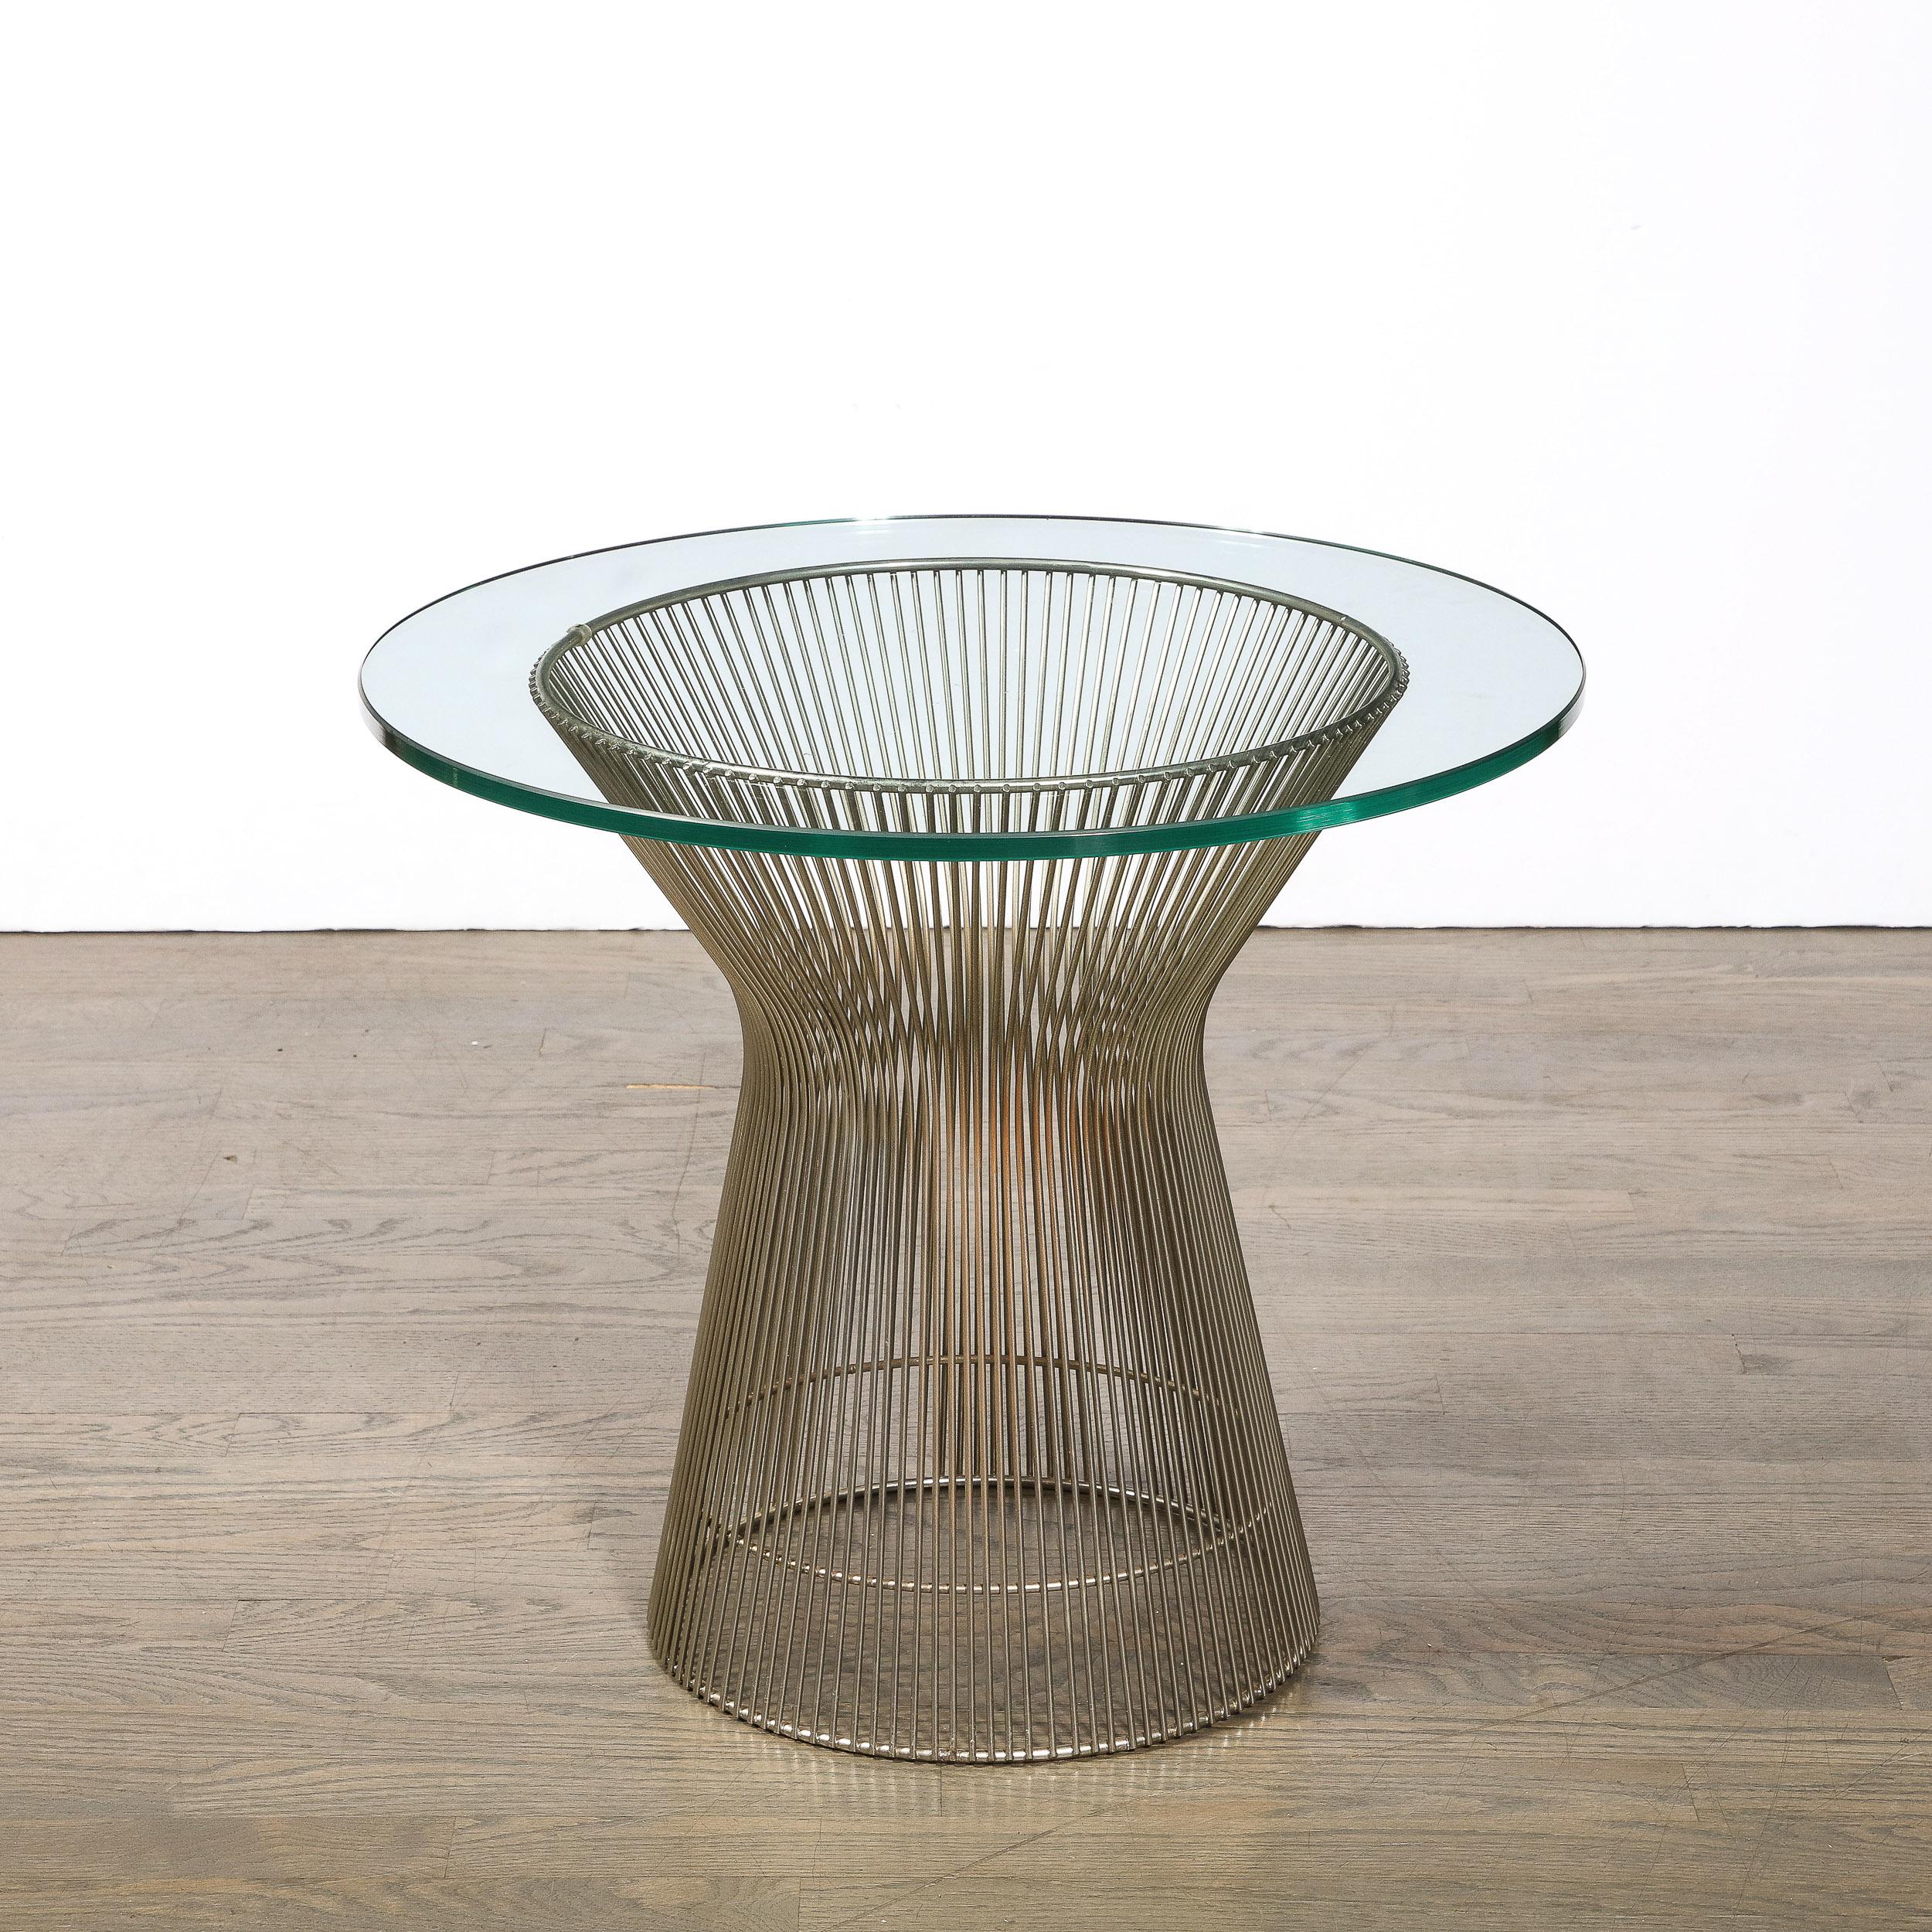 Late 20th Century Pair of Mid-Century Modernist Polished Nickel Side Tables by Warren Platner